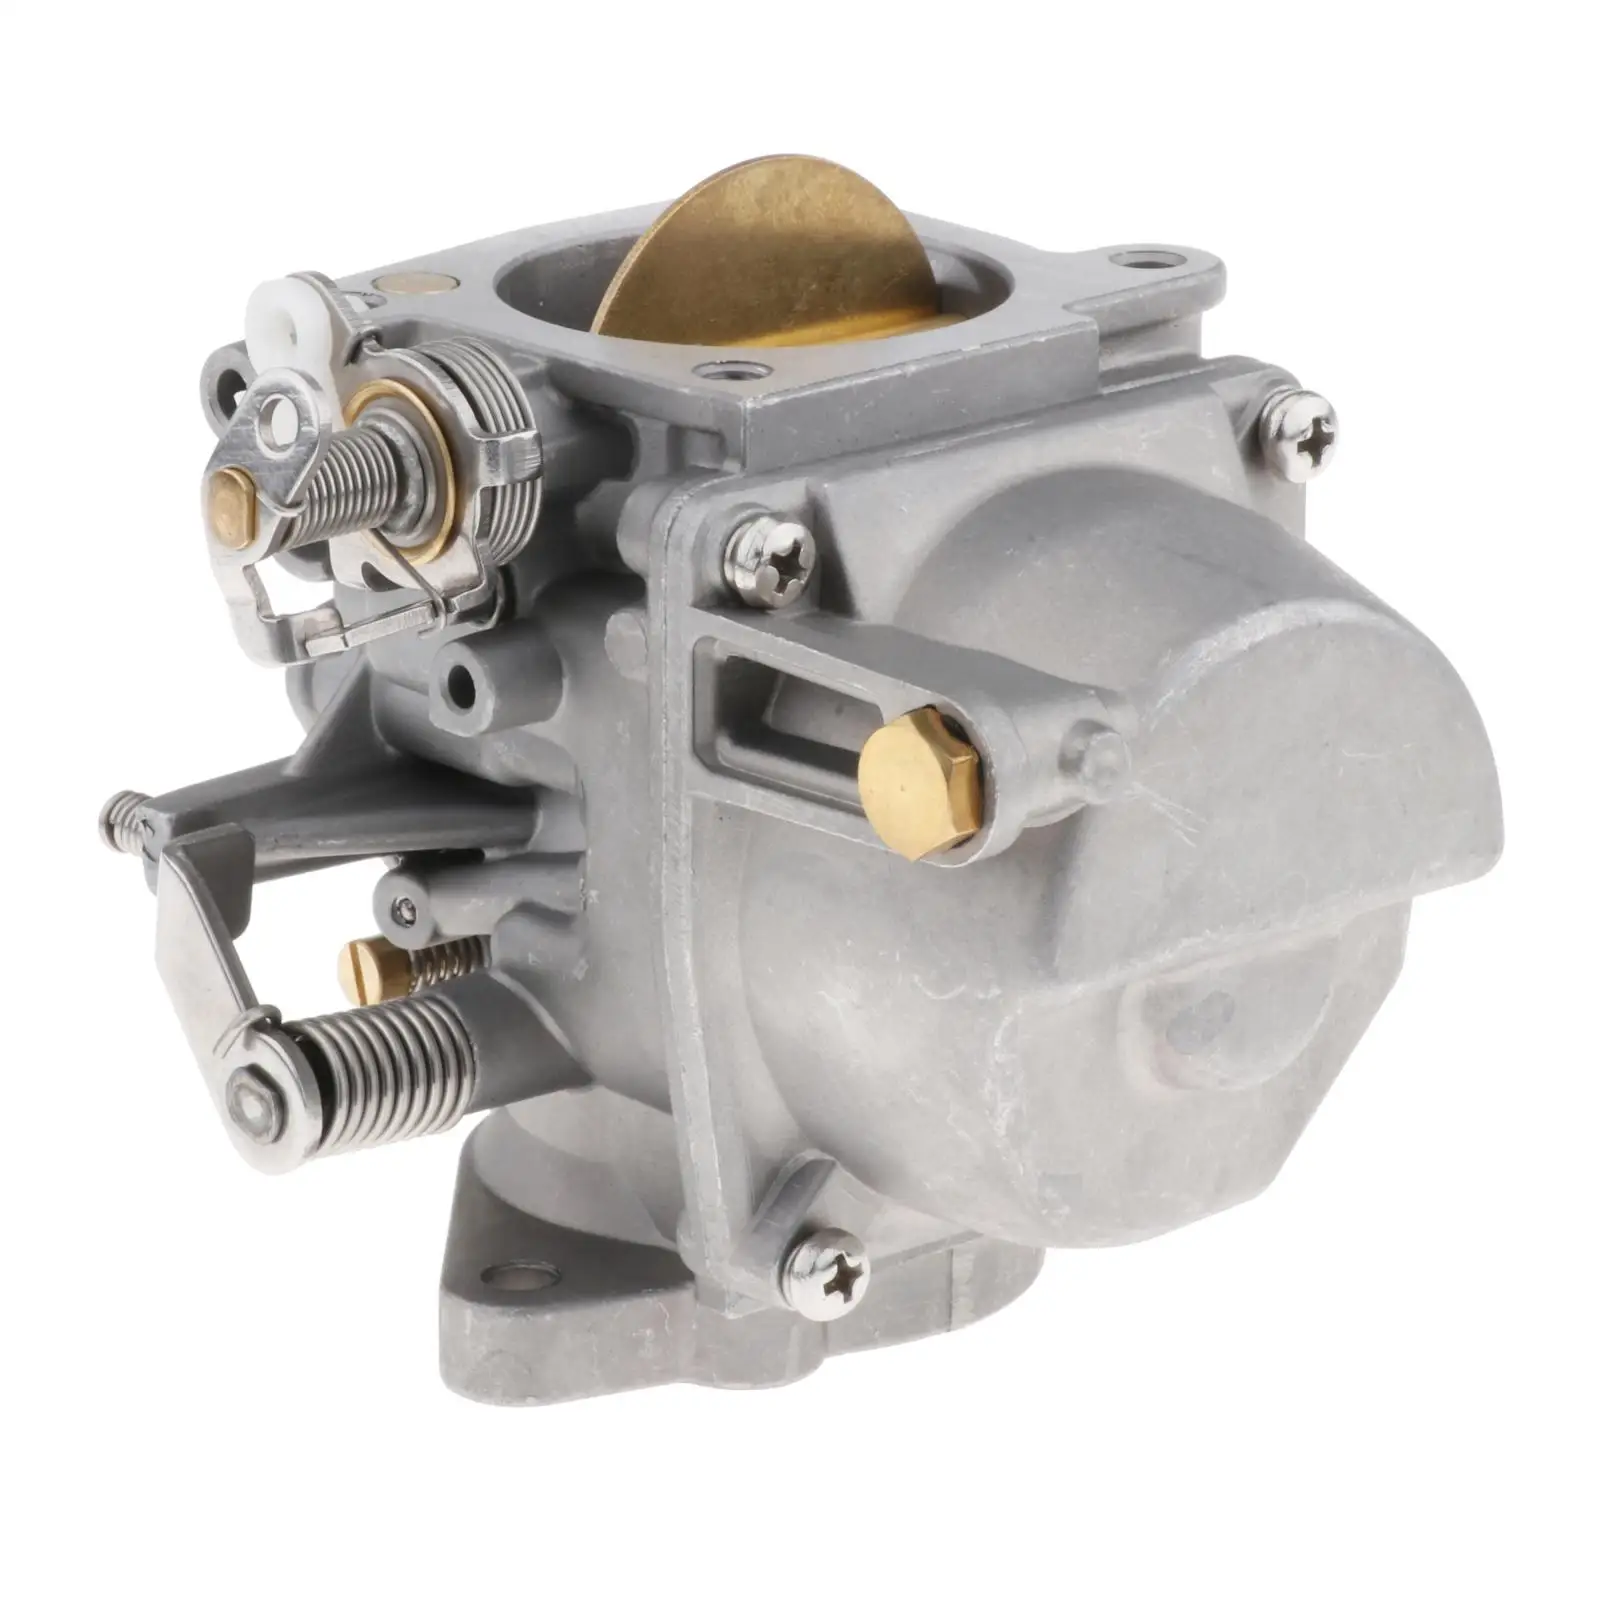 

Boat Motor Carburetor Carb Assy For Tohatsu Nissan 25HP M25C 30HP M30A 25C3 30A4 2 Stroke 3P0-03200-0 3P0032000M